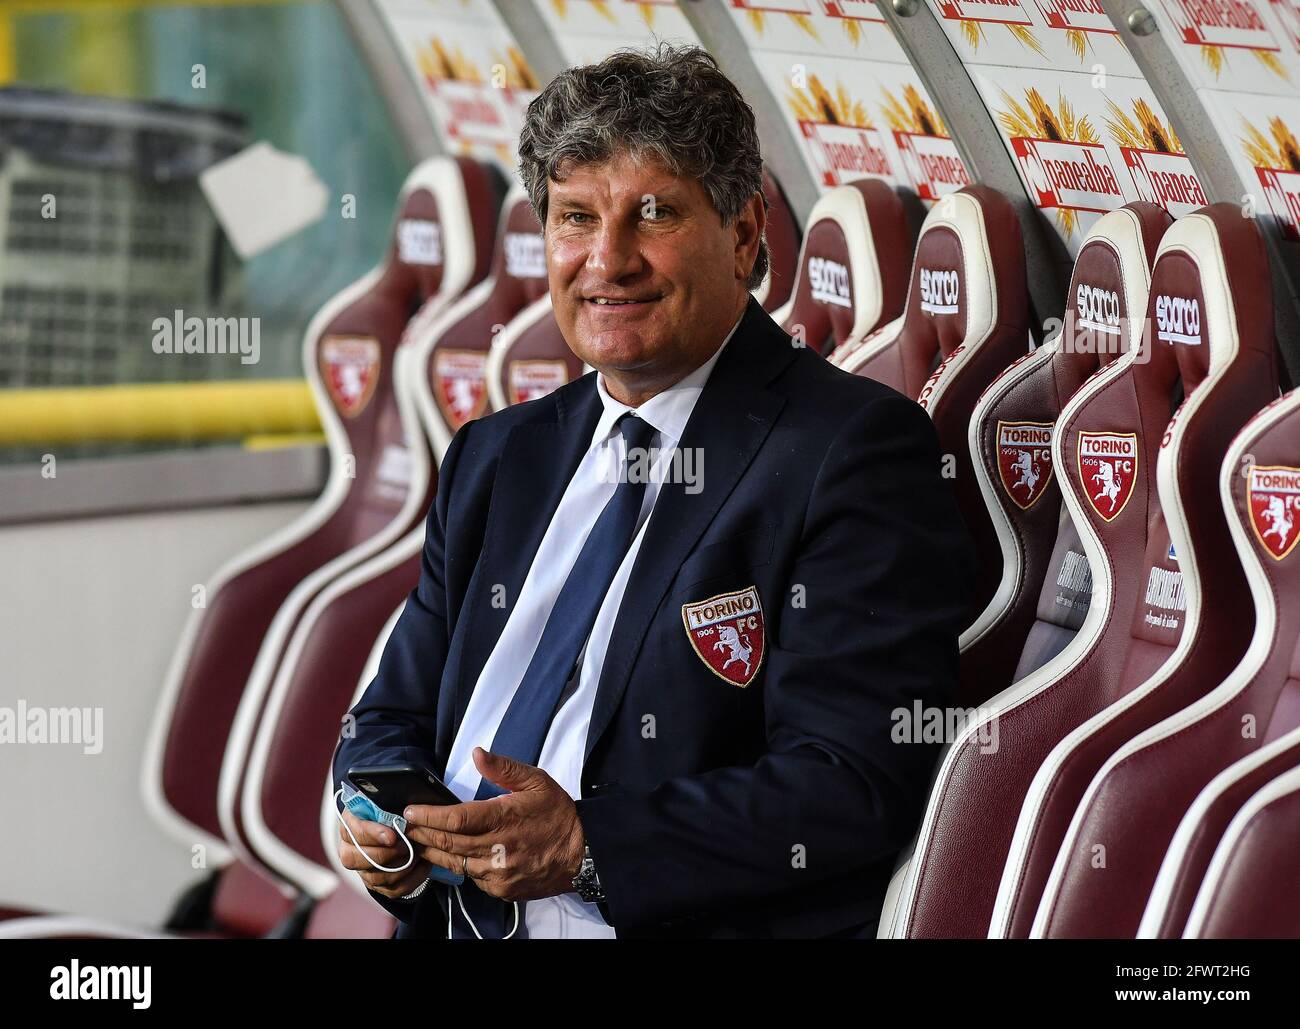 Antonio Comi D.G. of Torino FC during the Serie A 2020/21 match